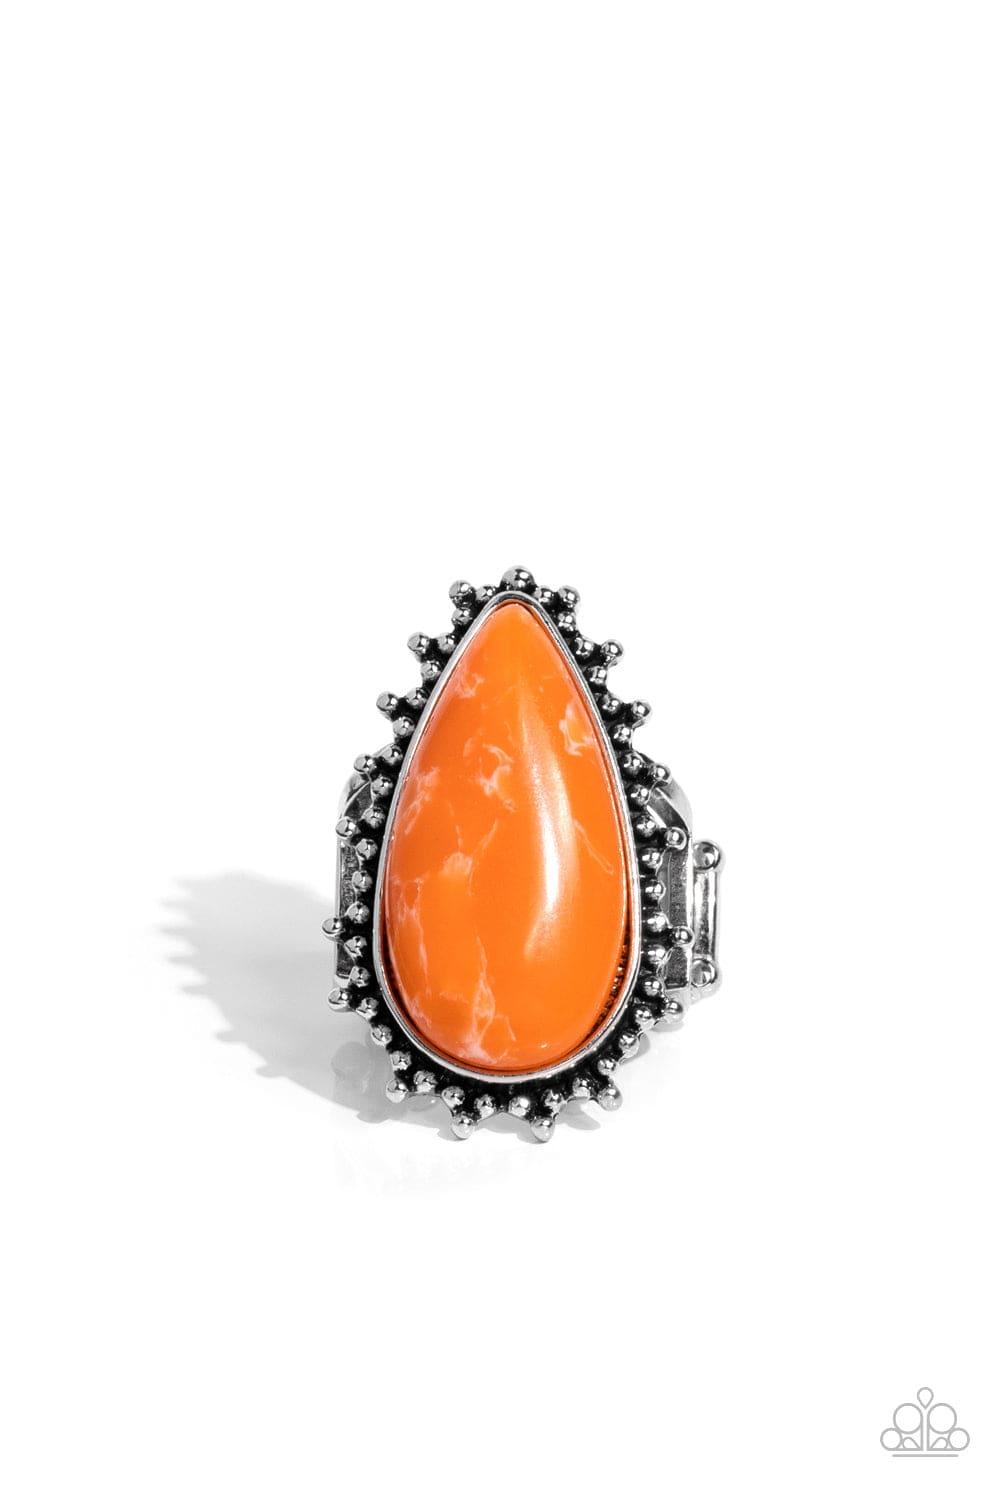 Paparazzi Accessories - Down-to-earth Essence - Orange Ring - Bling by JessieK